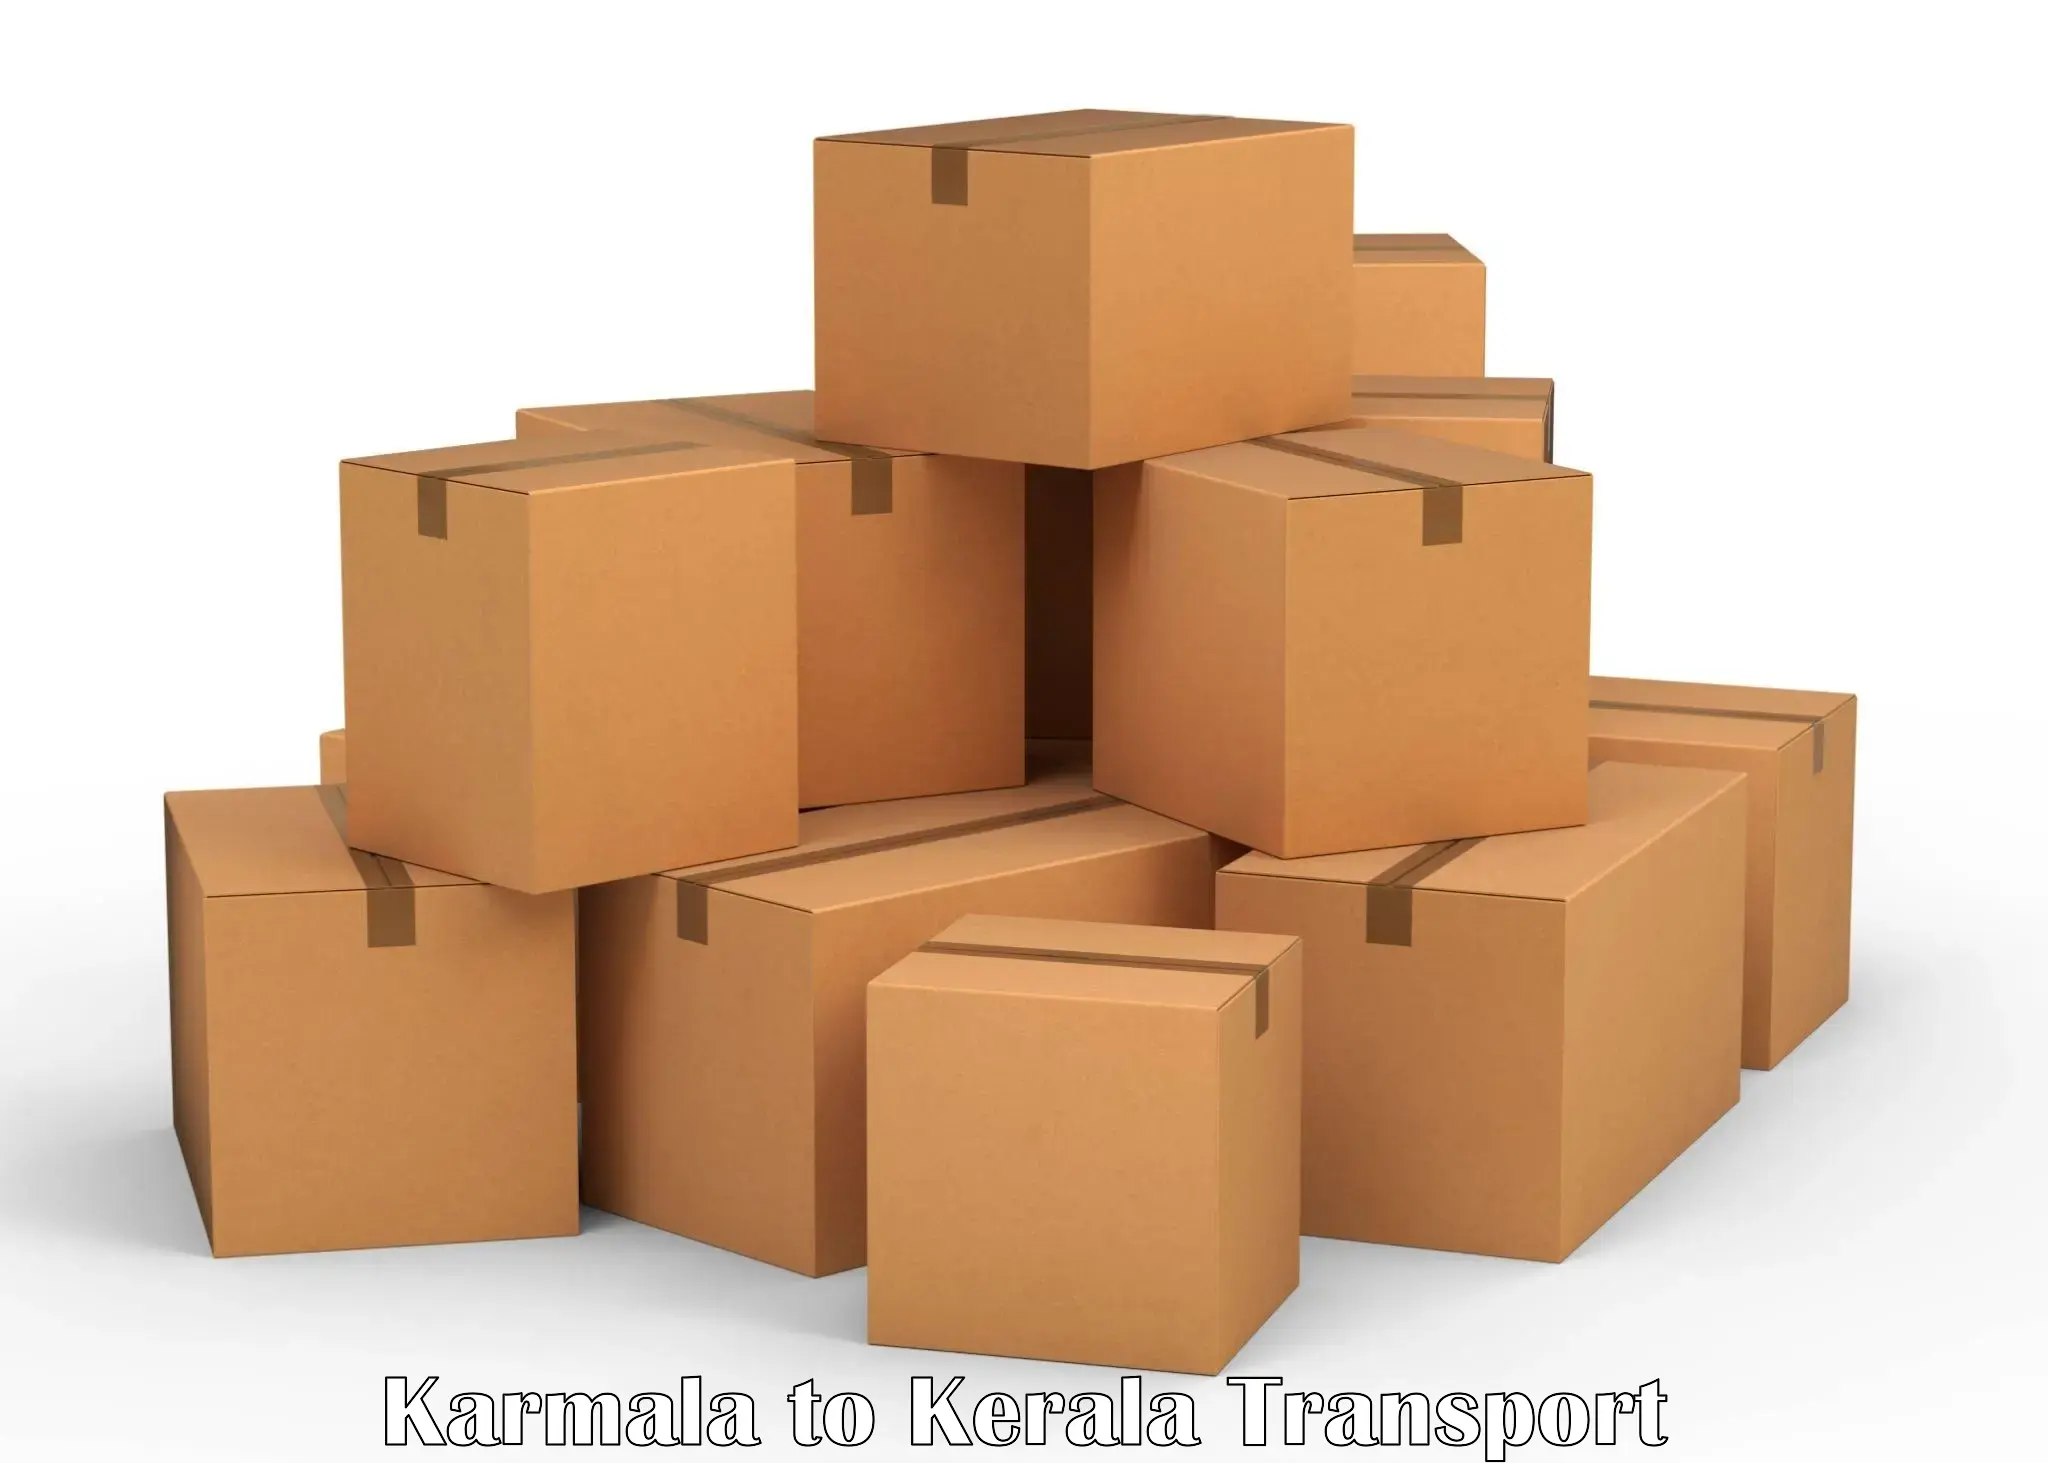 Transport shared services in Karmala to Kottayam